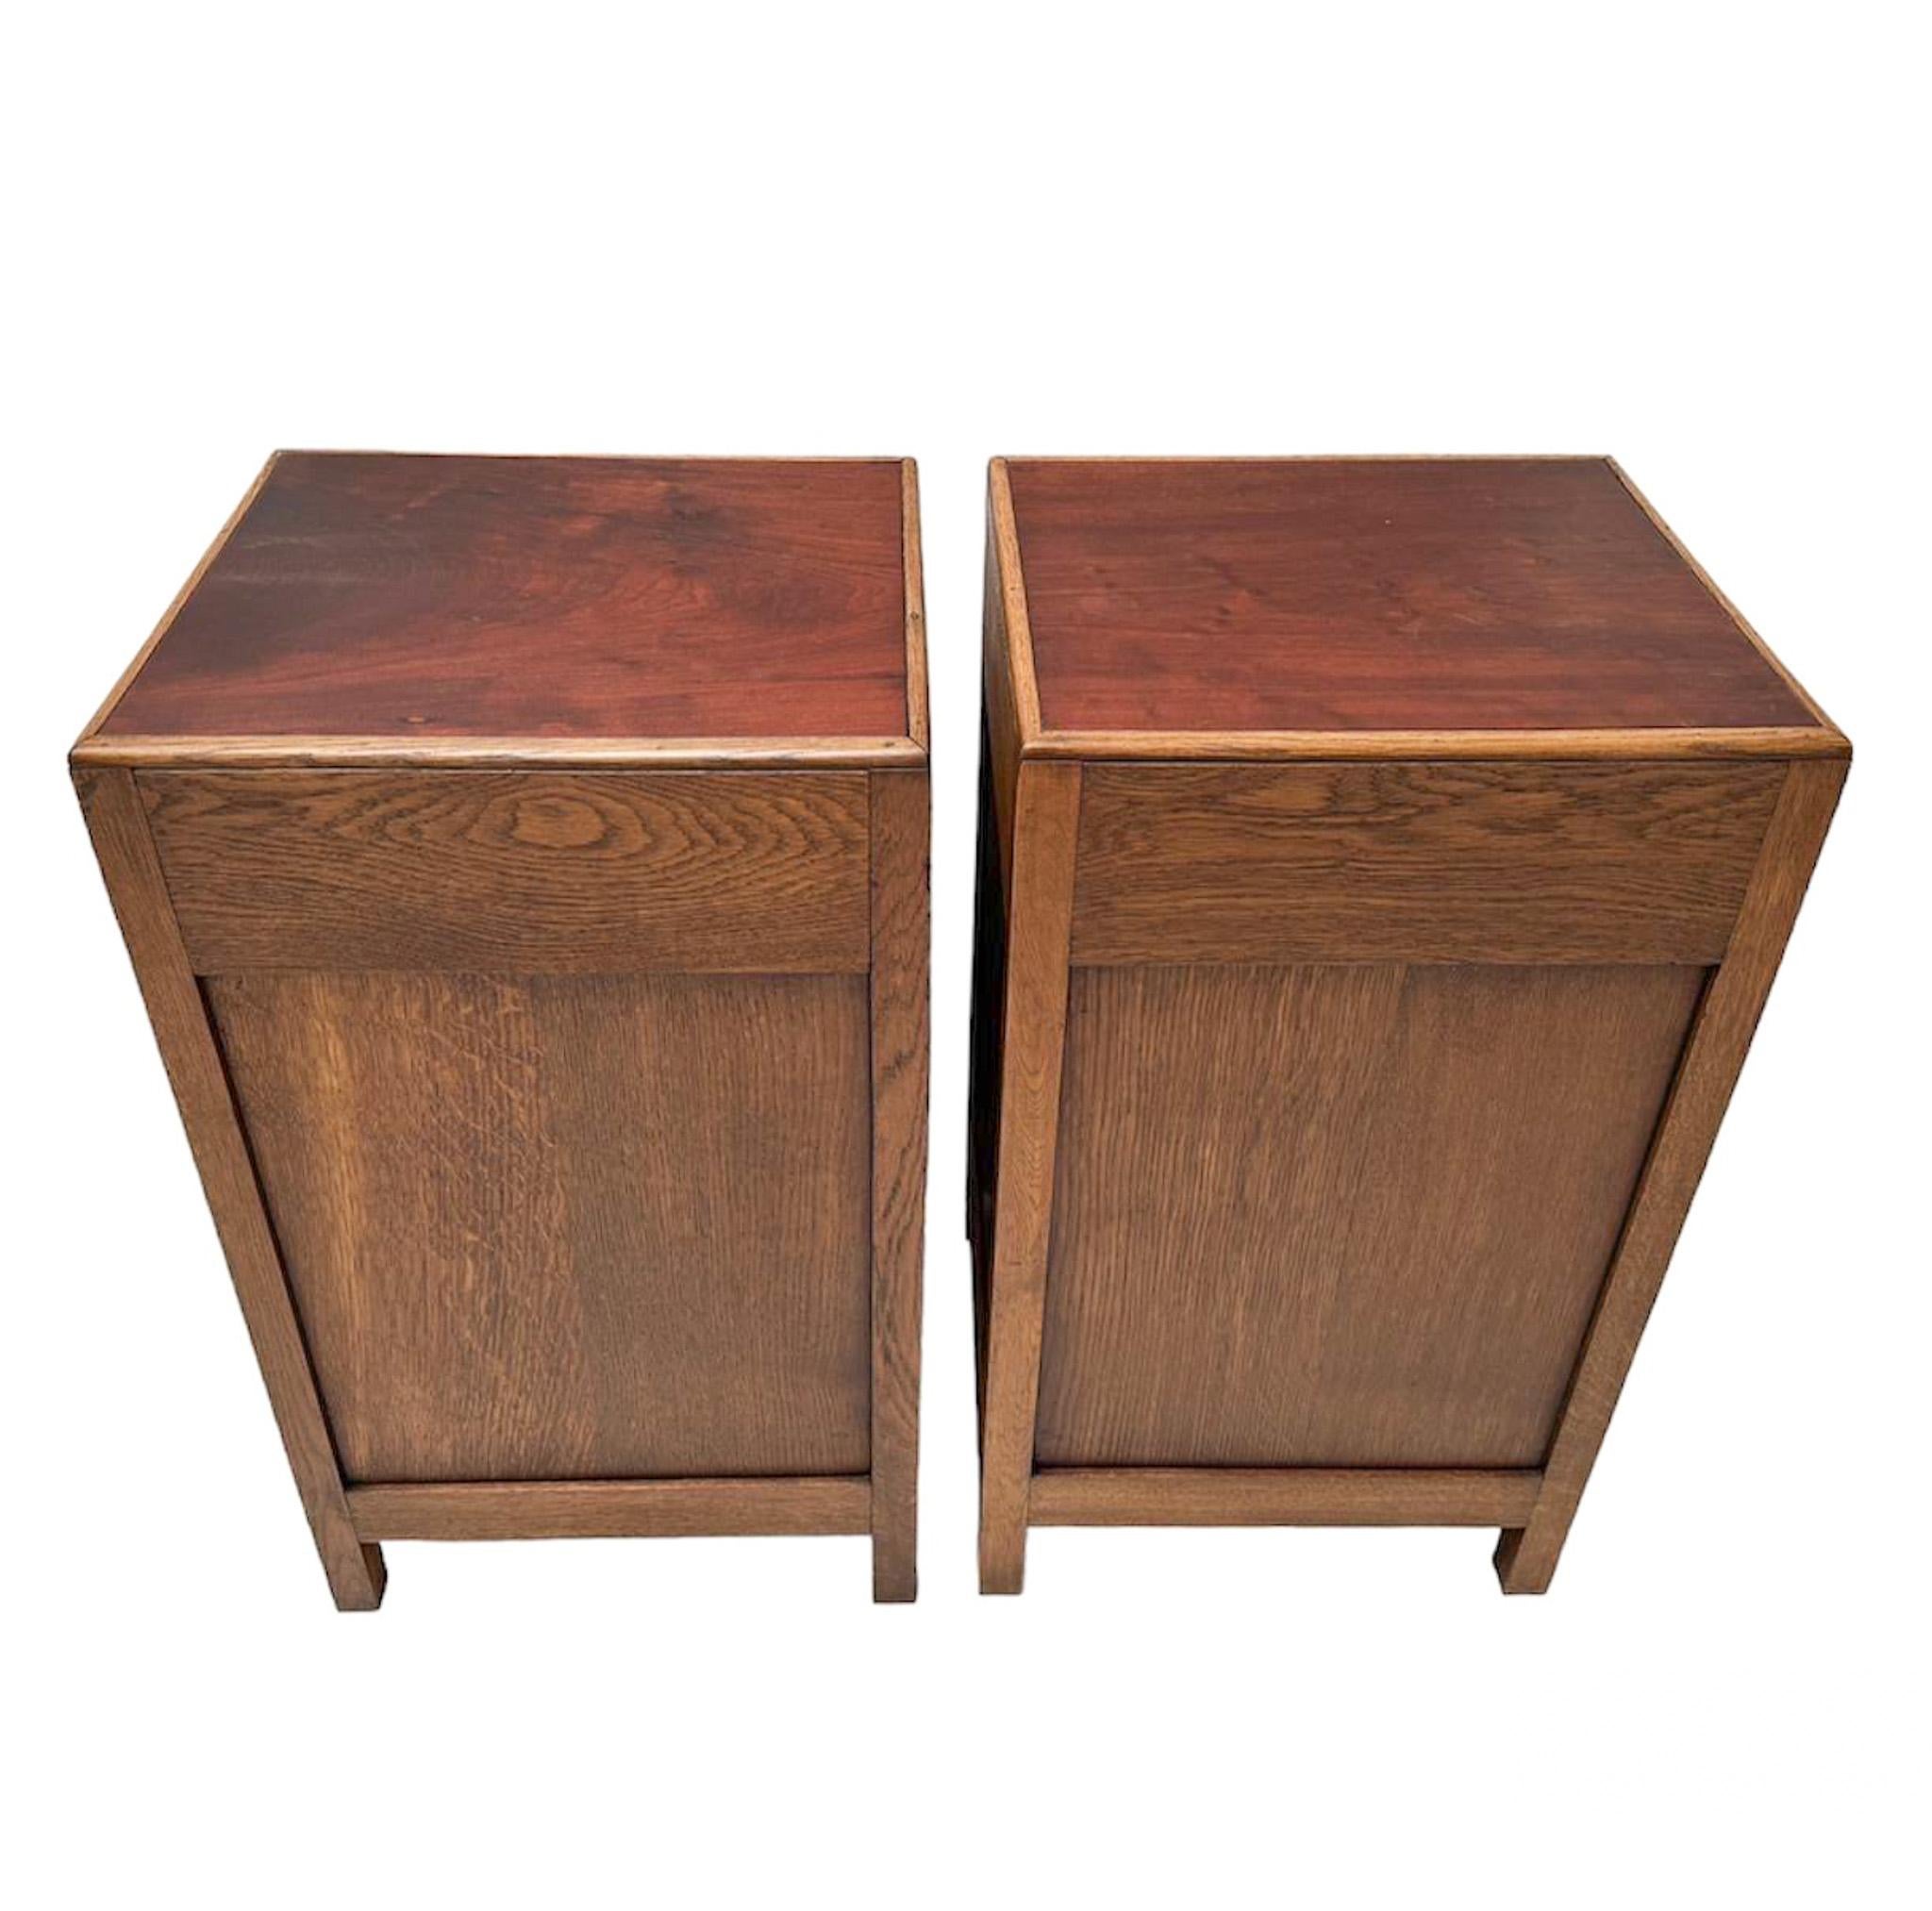 Stunning and rare pair of Art Deco Amsterdamse School nightstands or bedside tables.
Design by Fa. Drenth Den Haag.
Striking Dutch design from the 1920s.
Solid oak base with original solid padouk top.
Marked with original metal manufacturers